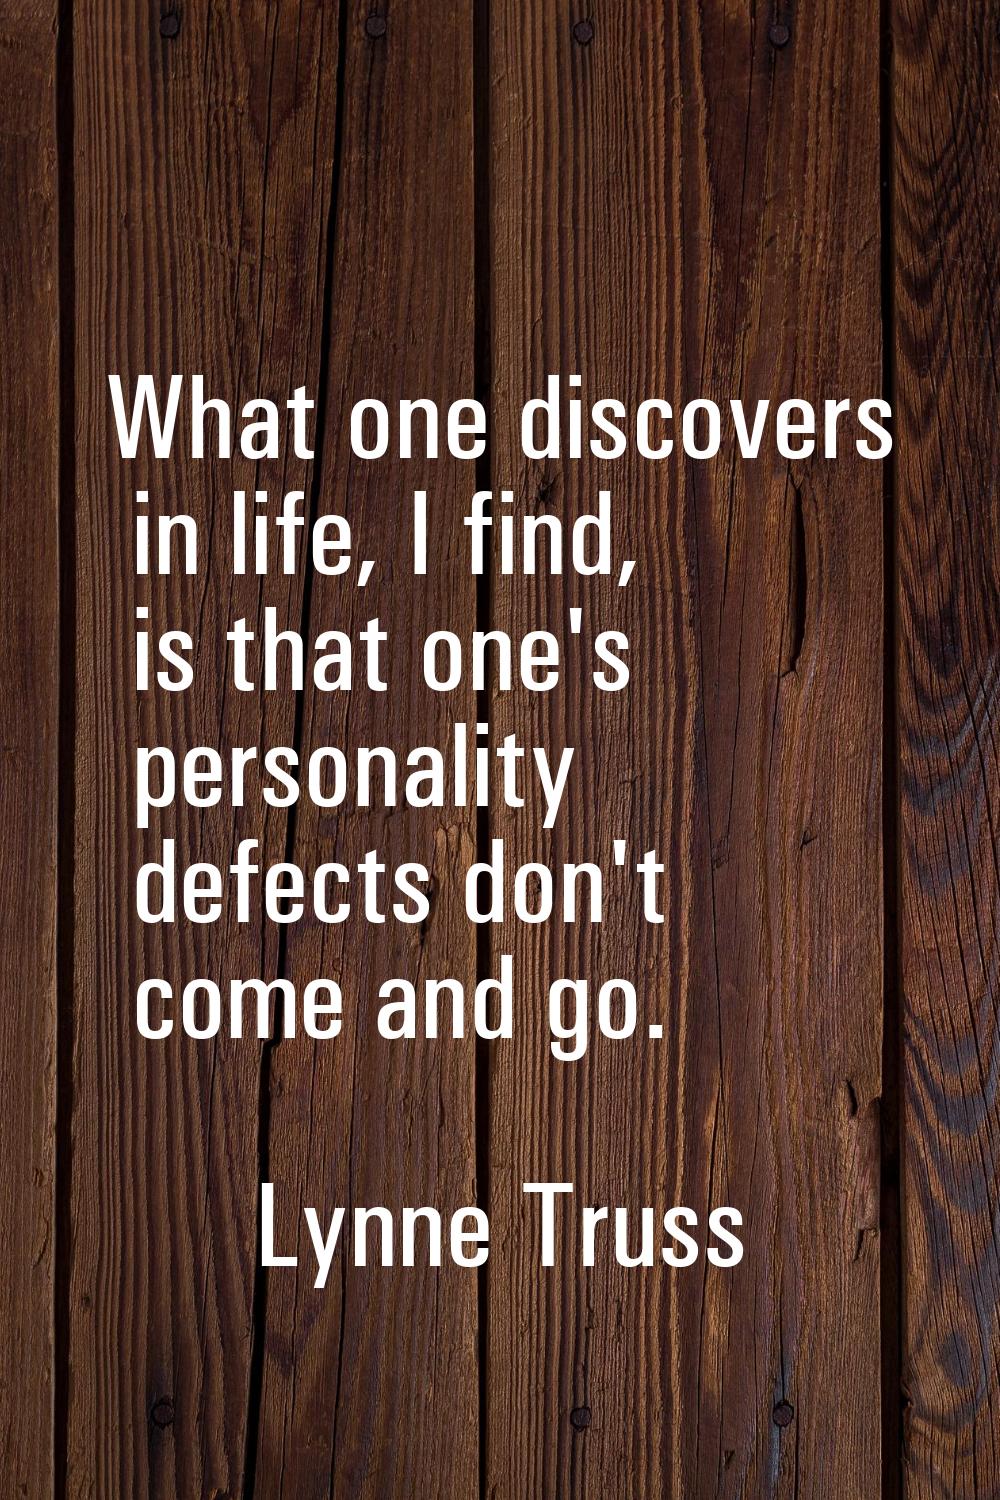 What one discovers in life, I find, is that one's personality defects don't come and go.